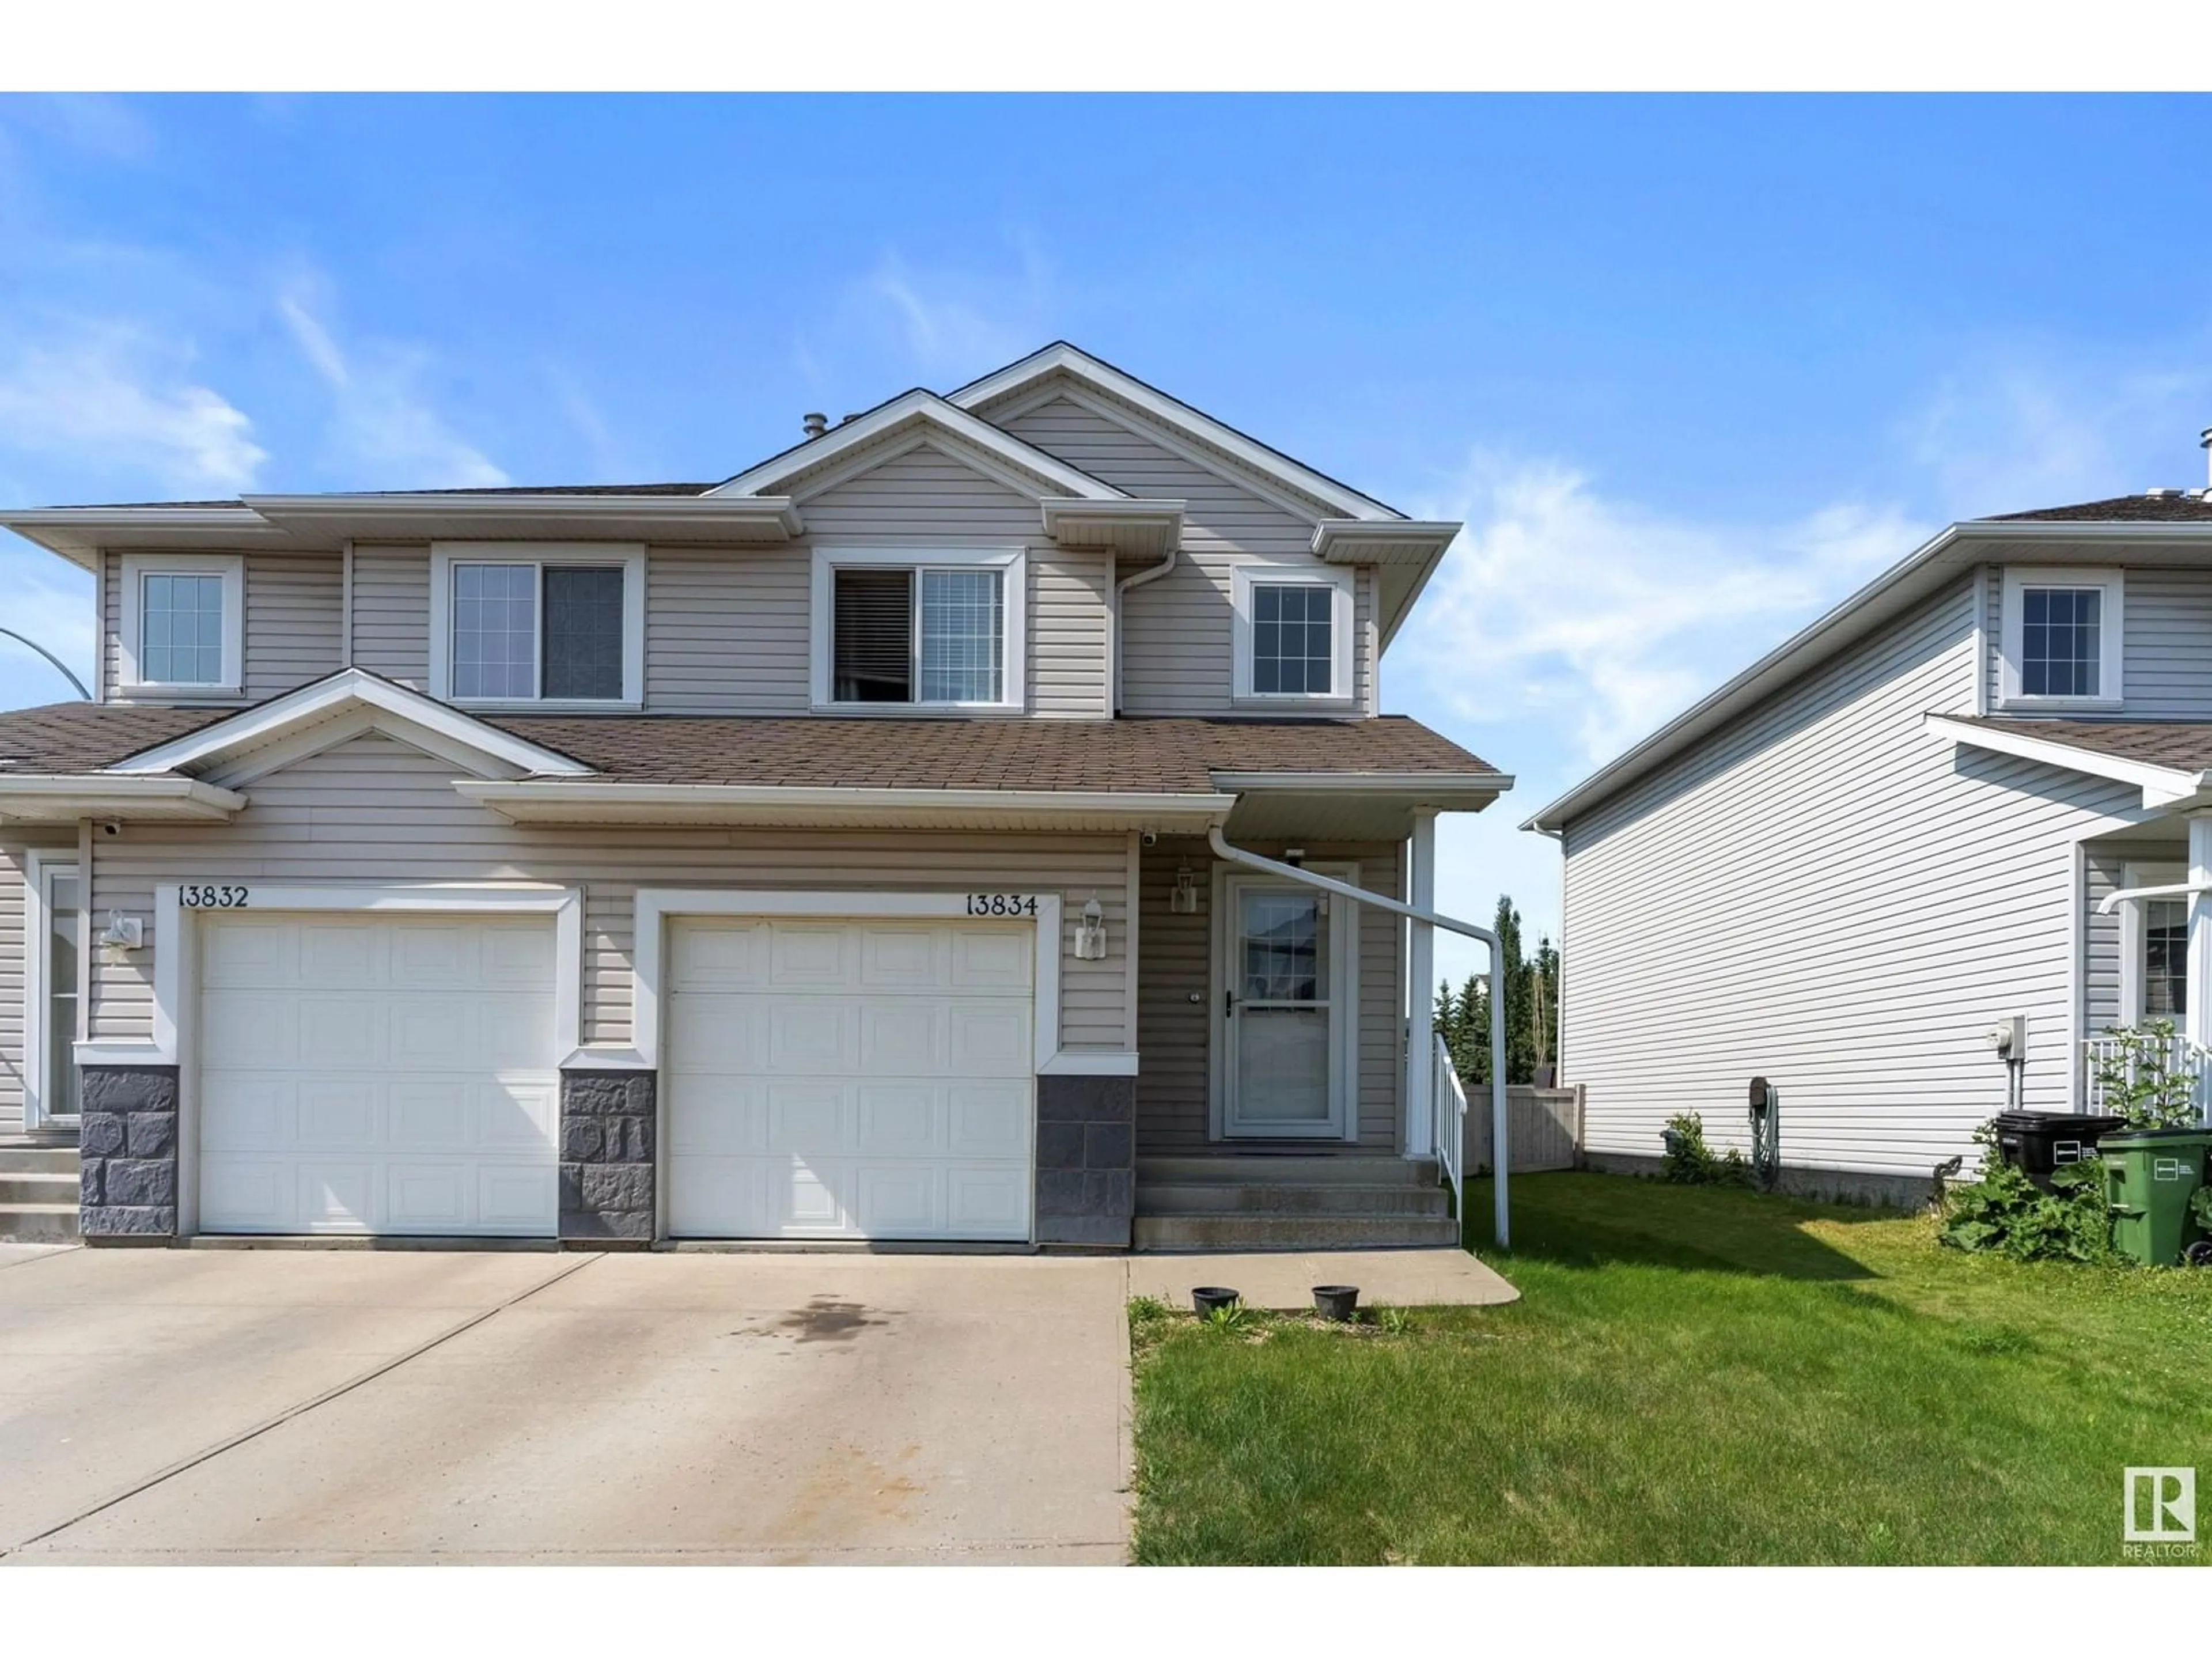 A pic from exterior of the house or condo for 13834 37 ST NW, Edmonton Alberta T5Y3G5